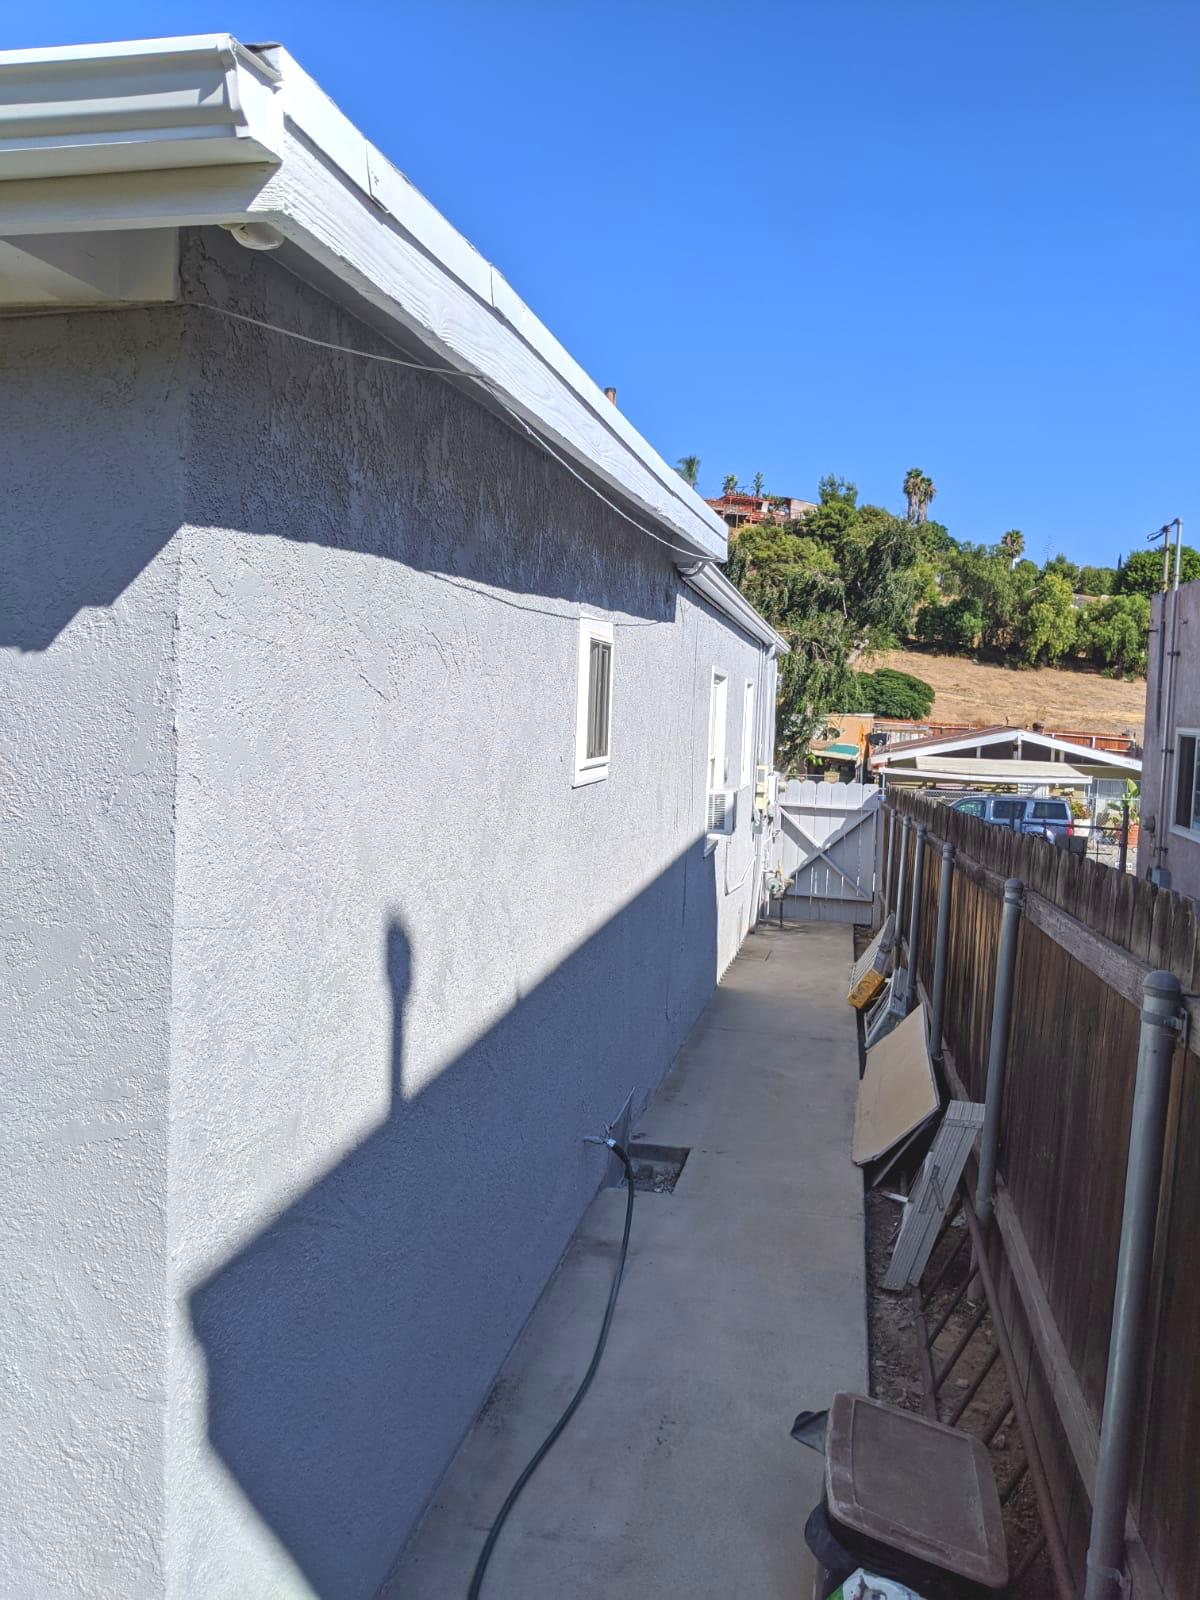 ﻿﻿House Painting in San Diego 92116